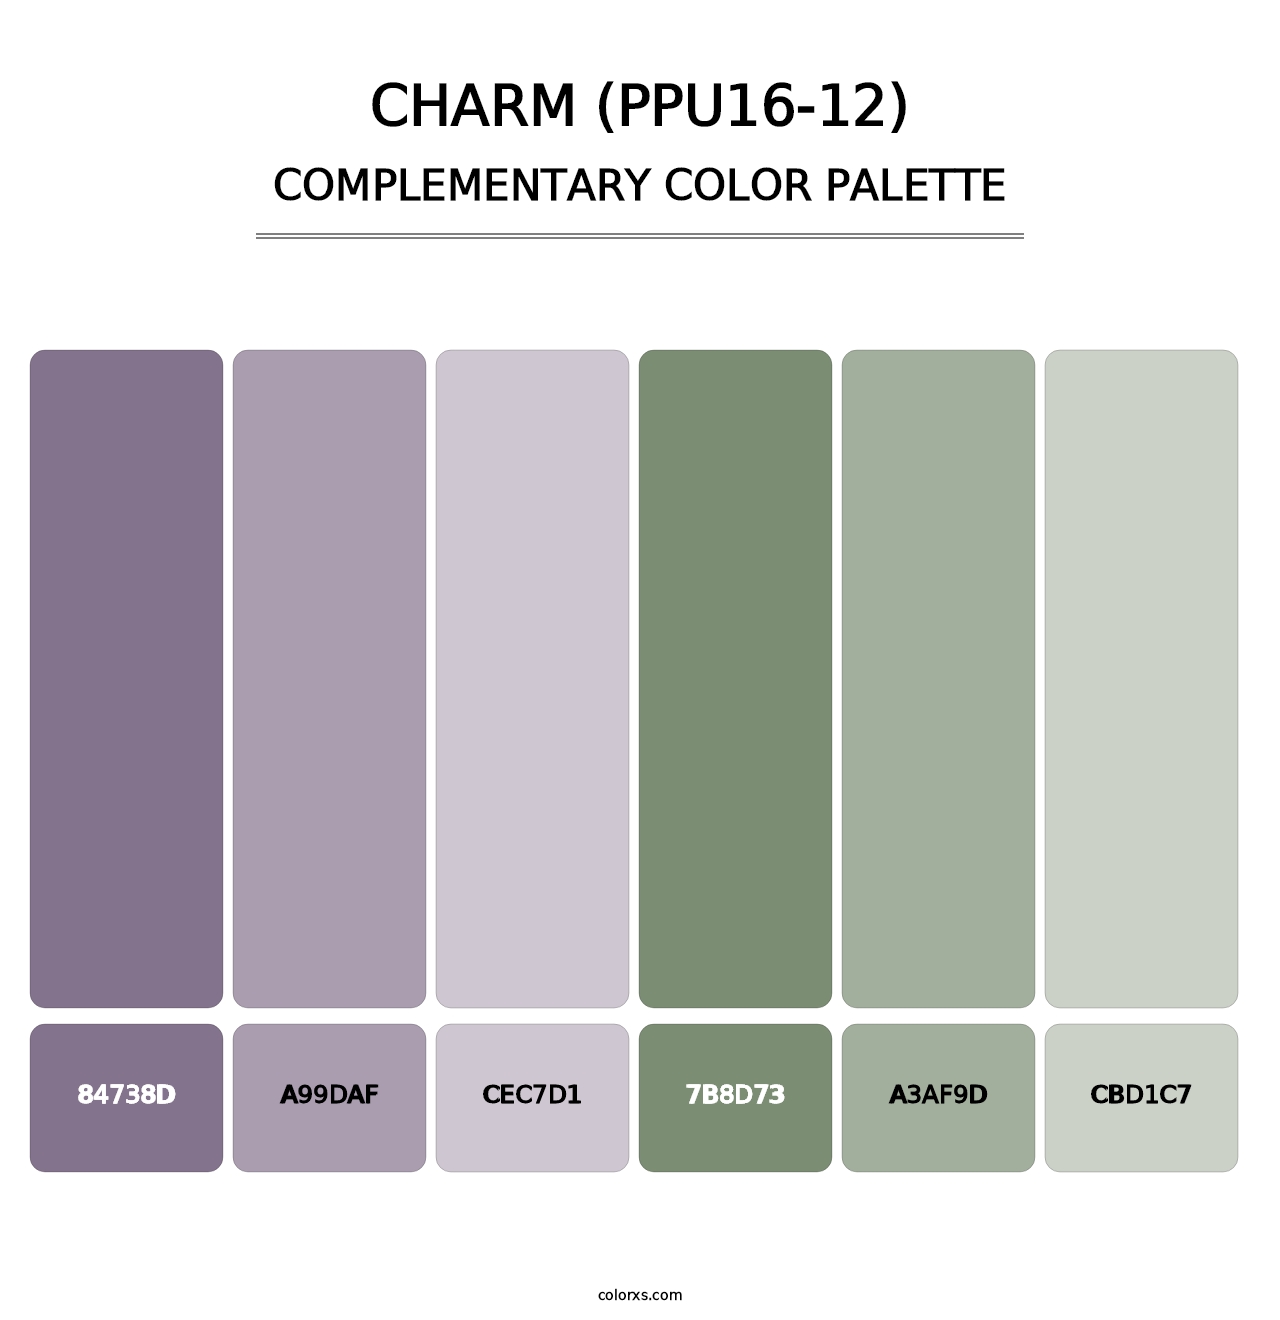 Charm (PPU16-12) - Complementary Color Palette